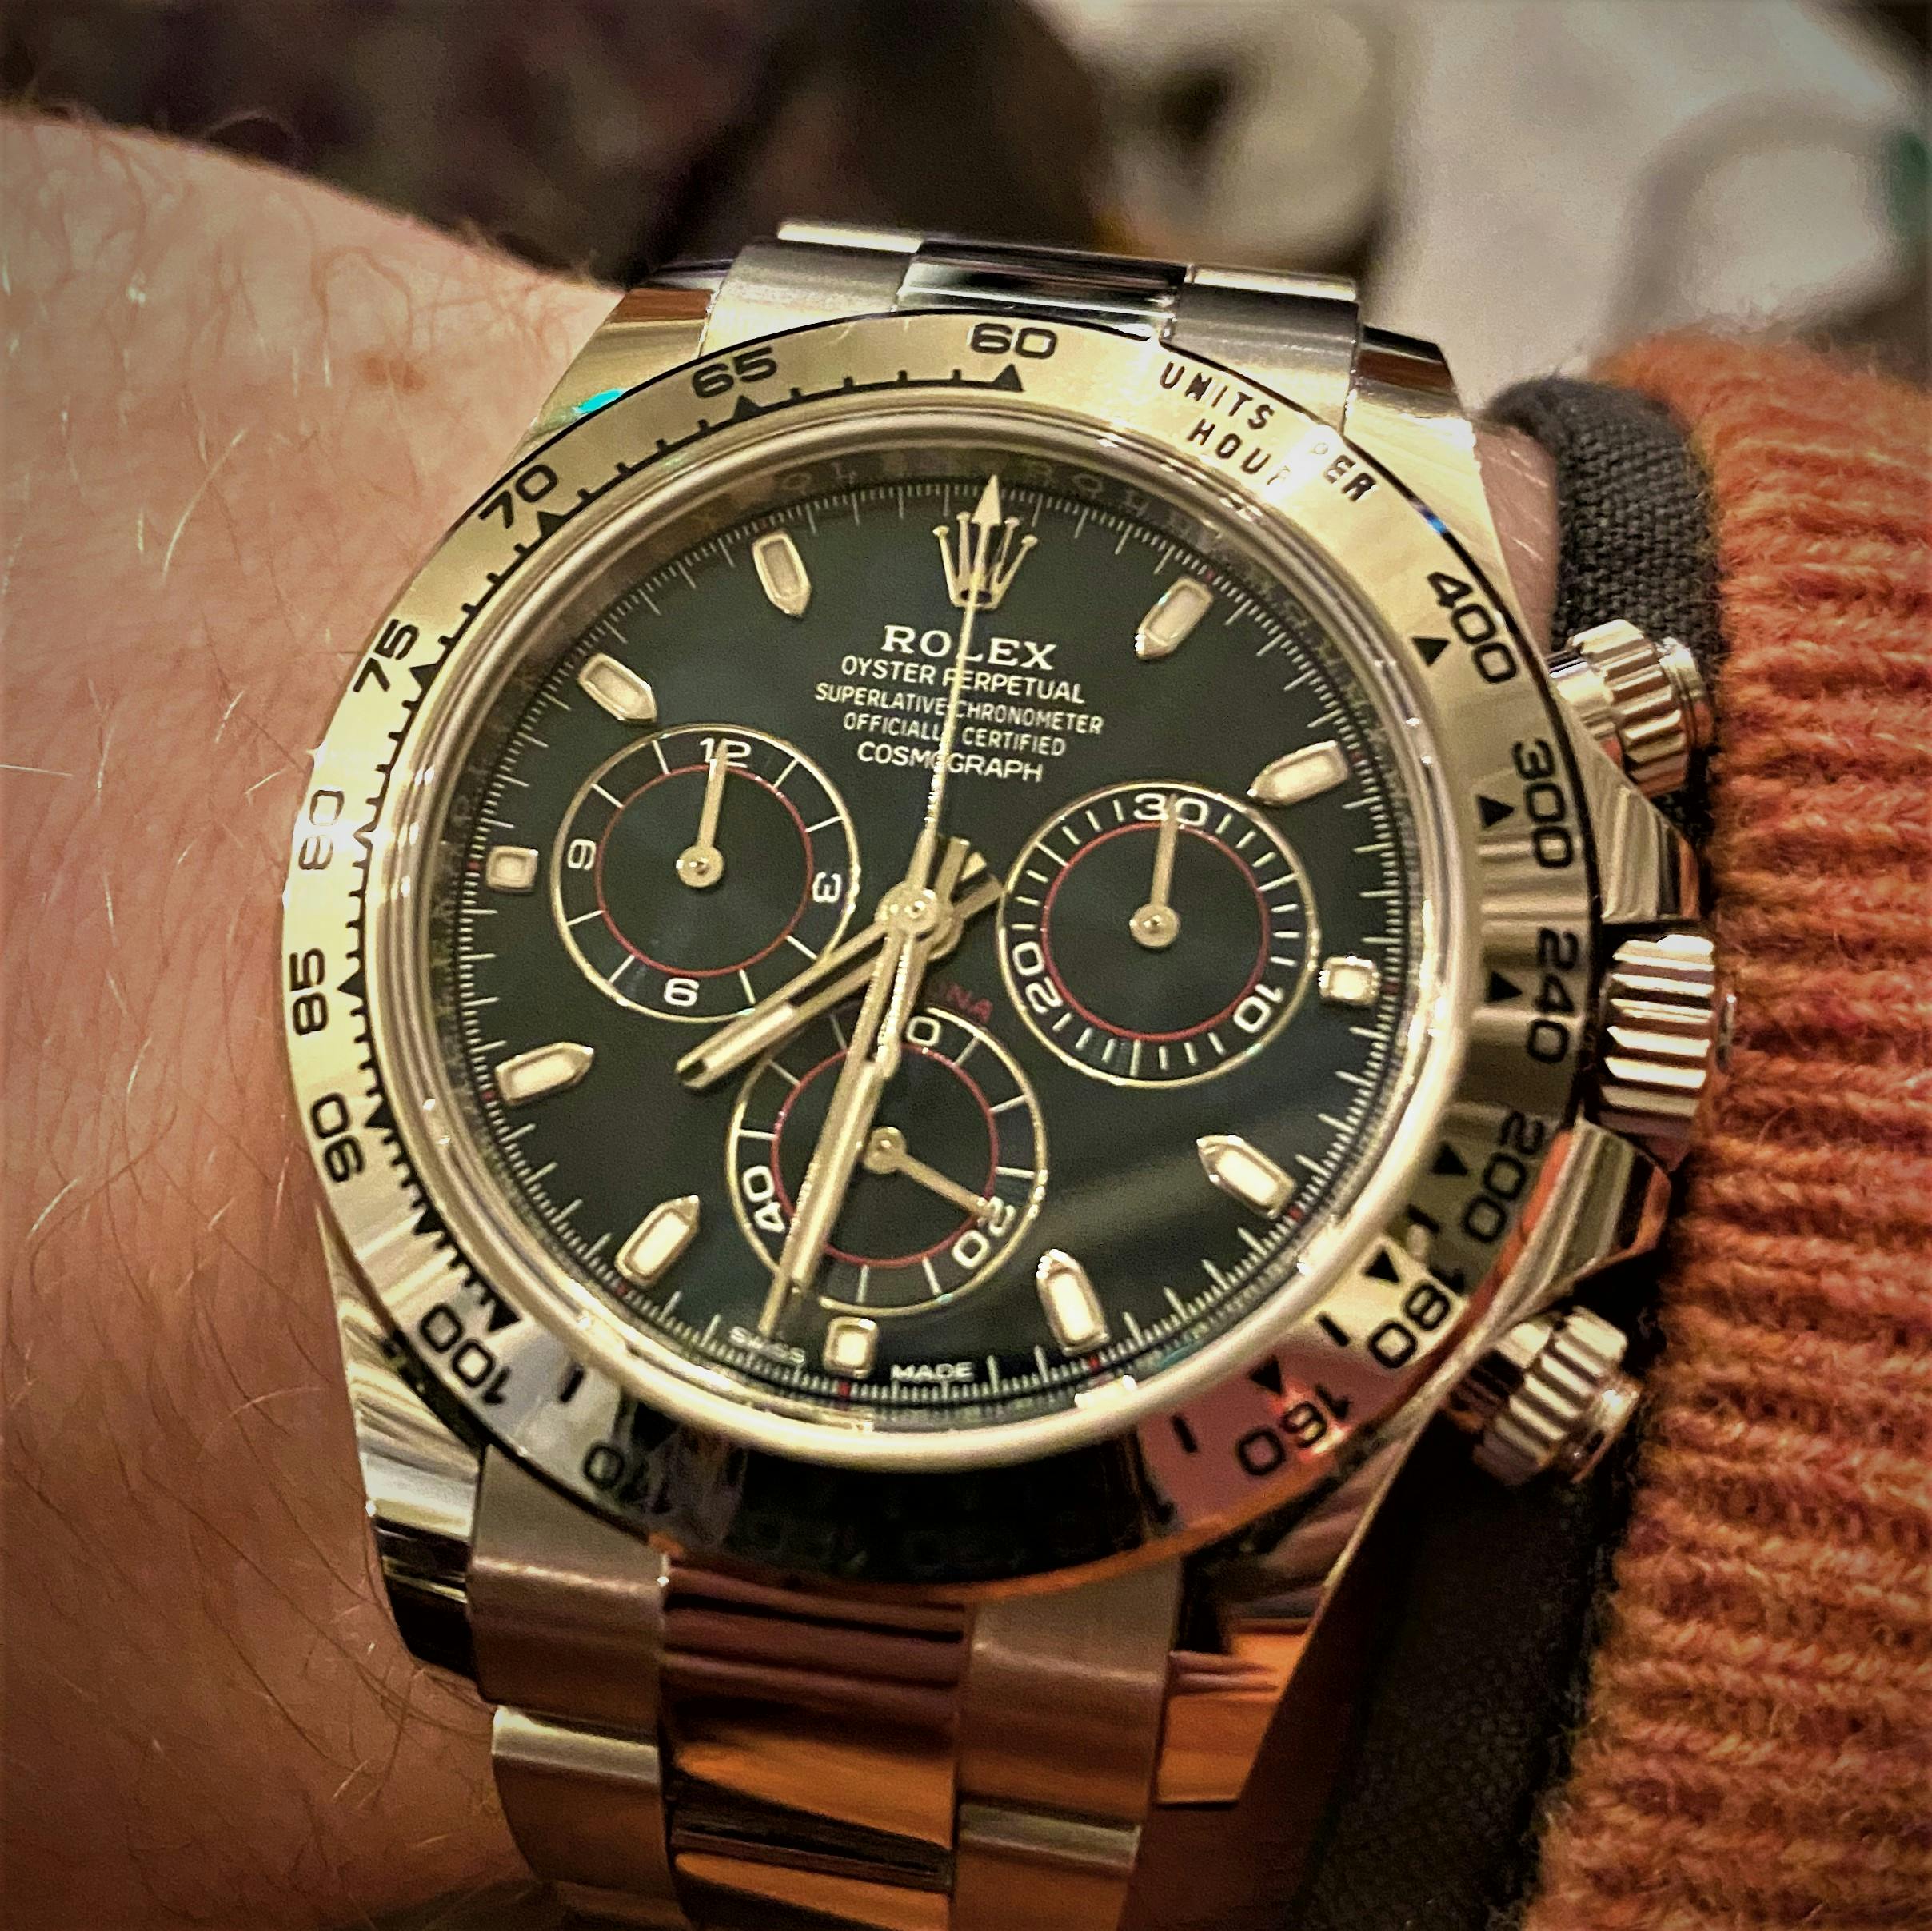 A white gold Rolex Daytona with a dark bluew dial and white gold hands and indices with red accents on the subdials, a white gold bezel with a tachymeter and a white gold braclet on someone's wrist.